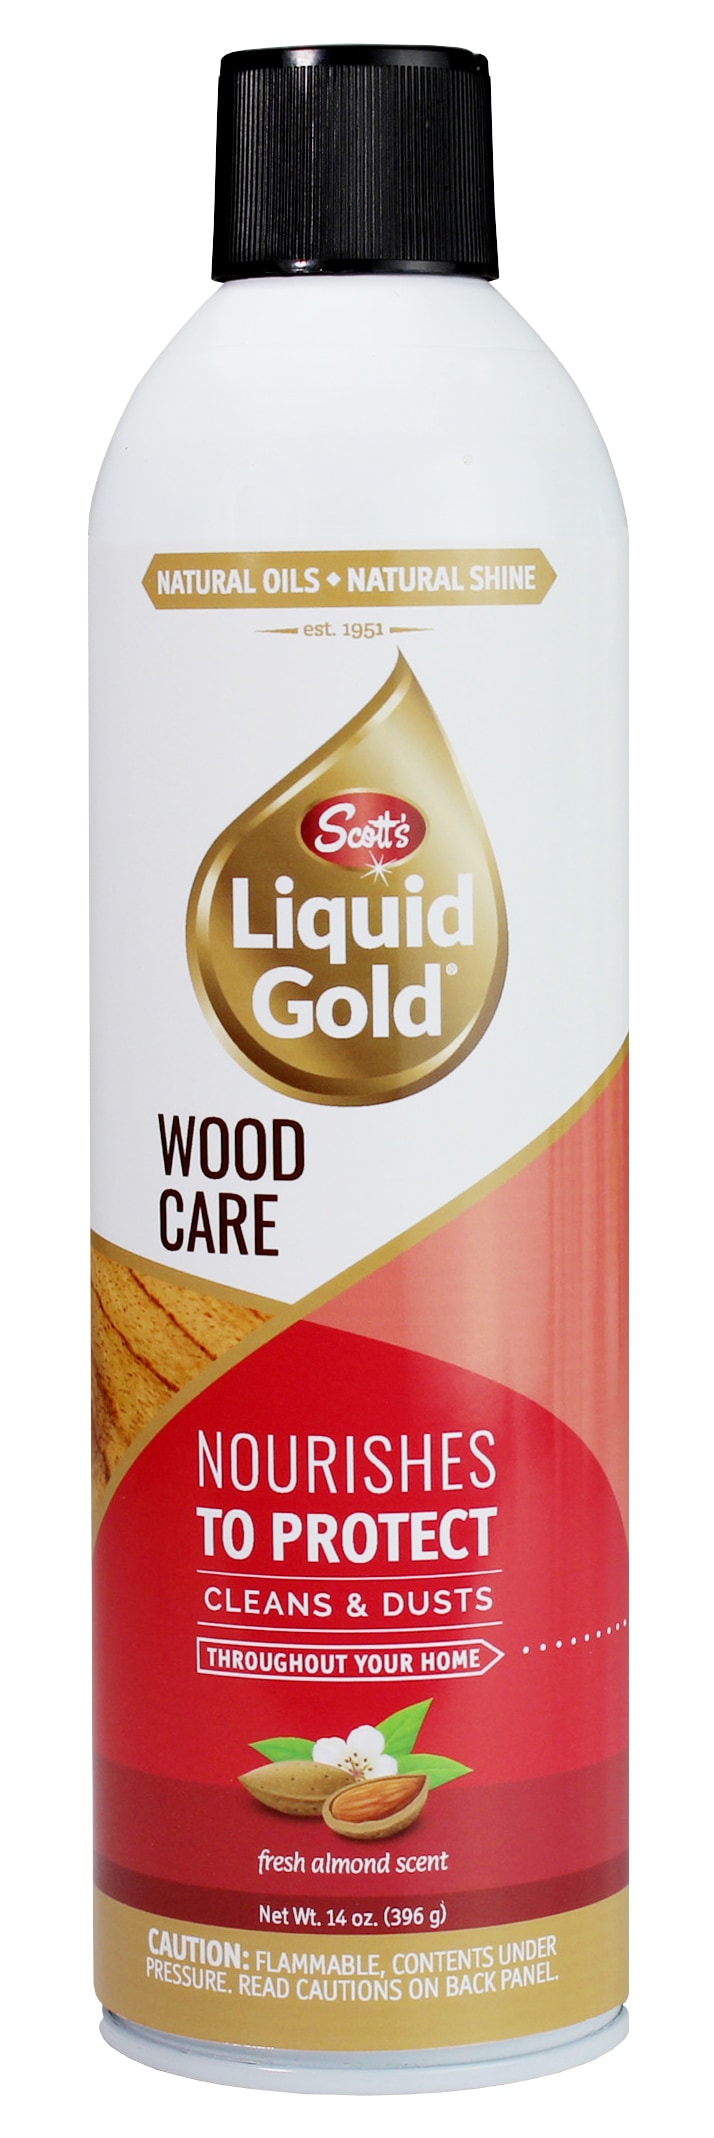 Scott\'s Liquid Gold and Spray Upholstery Cleaner 14-oz Cleaners & Furniture Furniture Polish department at the Almond Wood in